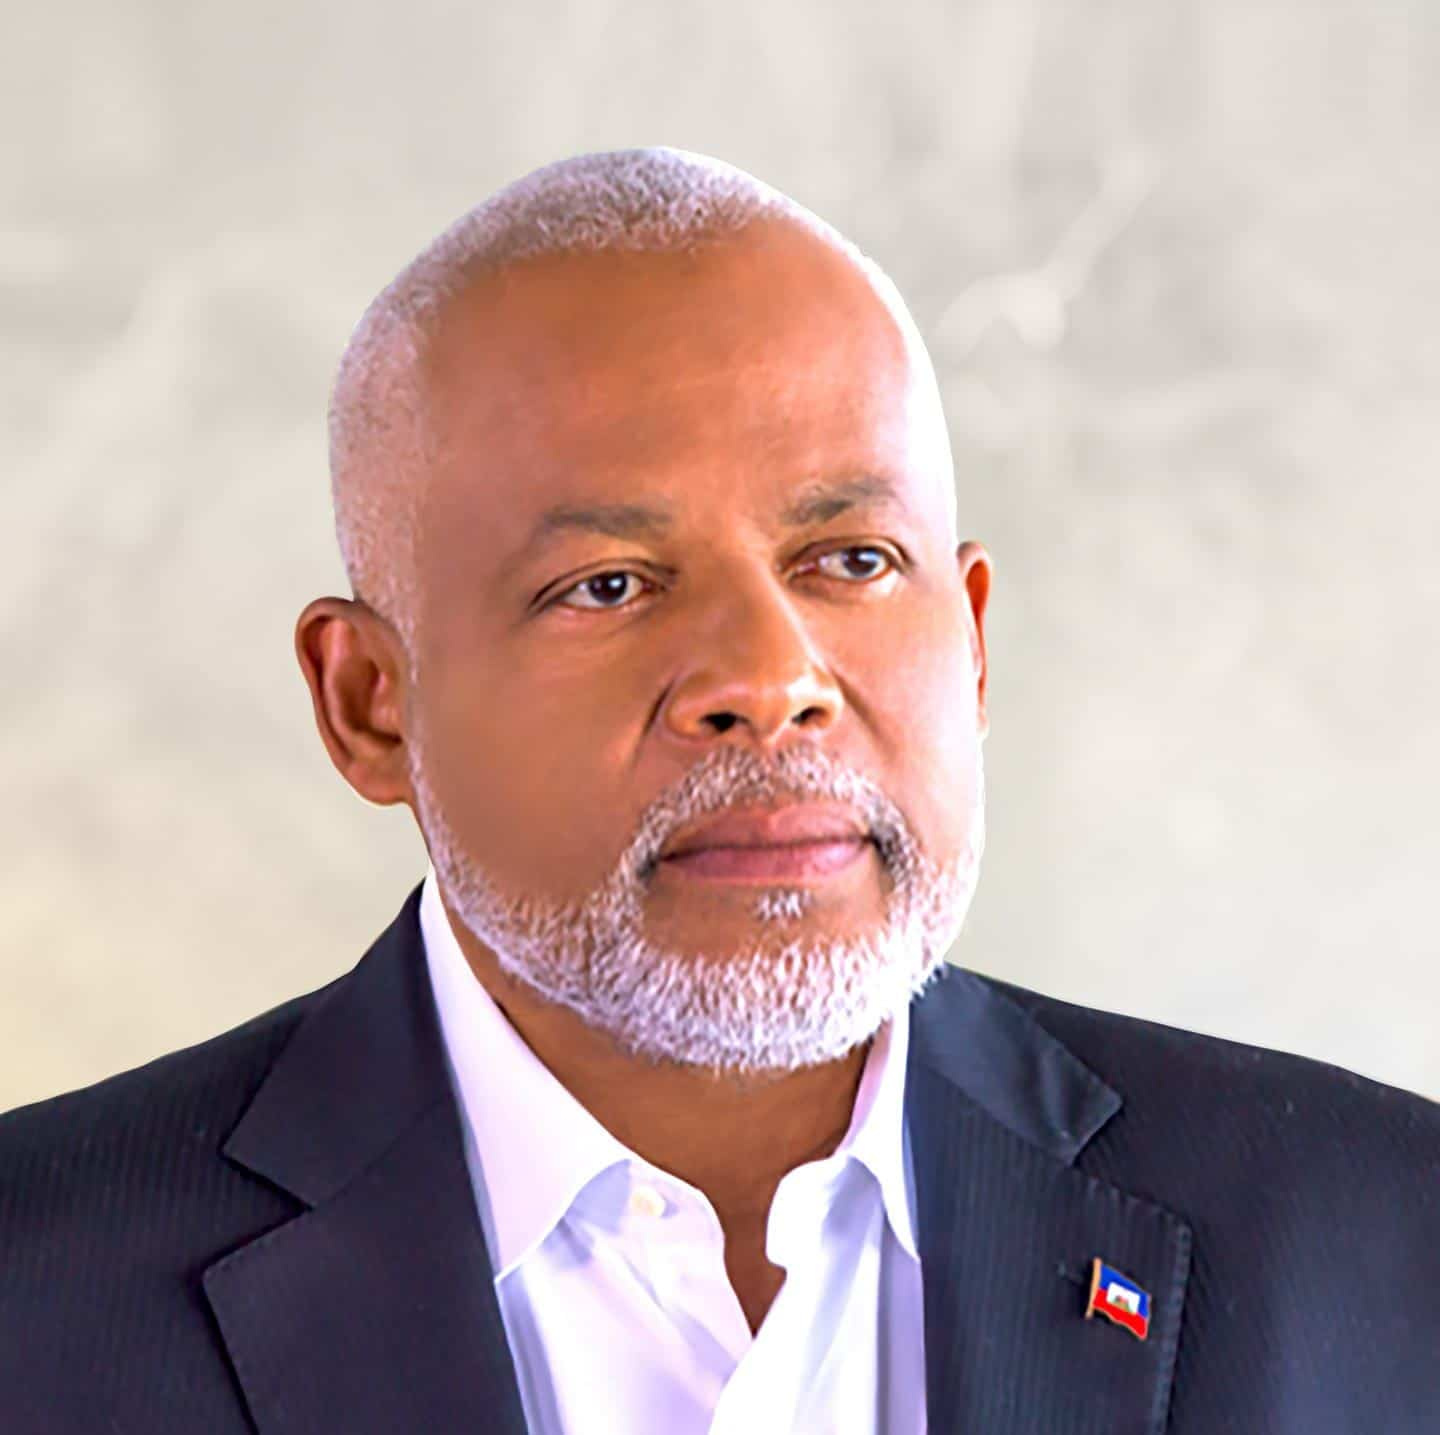 Leader of one of Haiti's main political parties assassinated